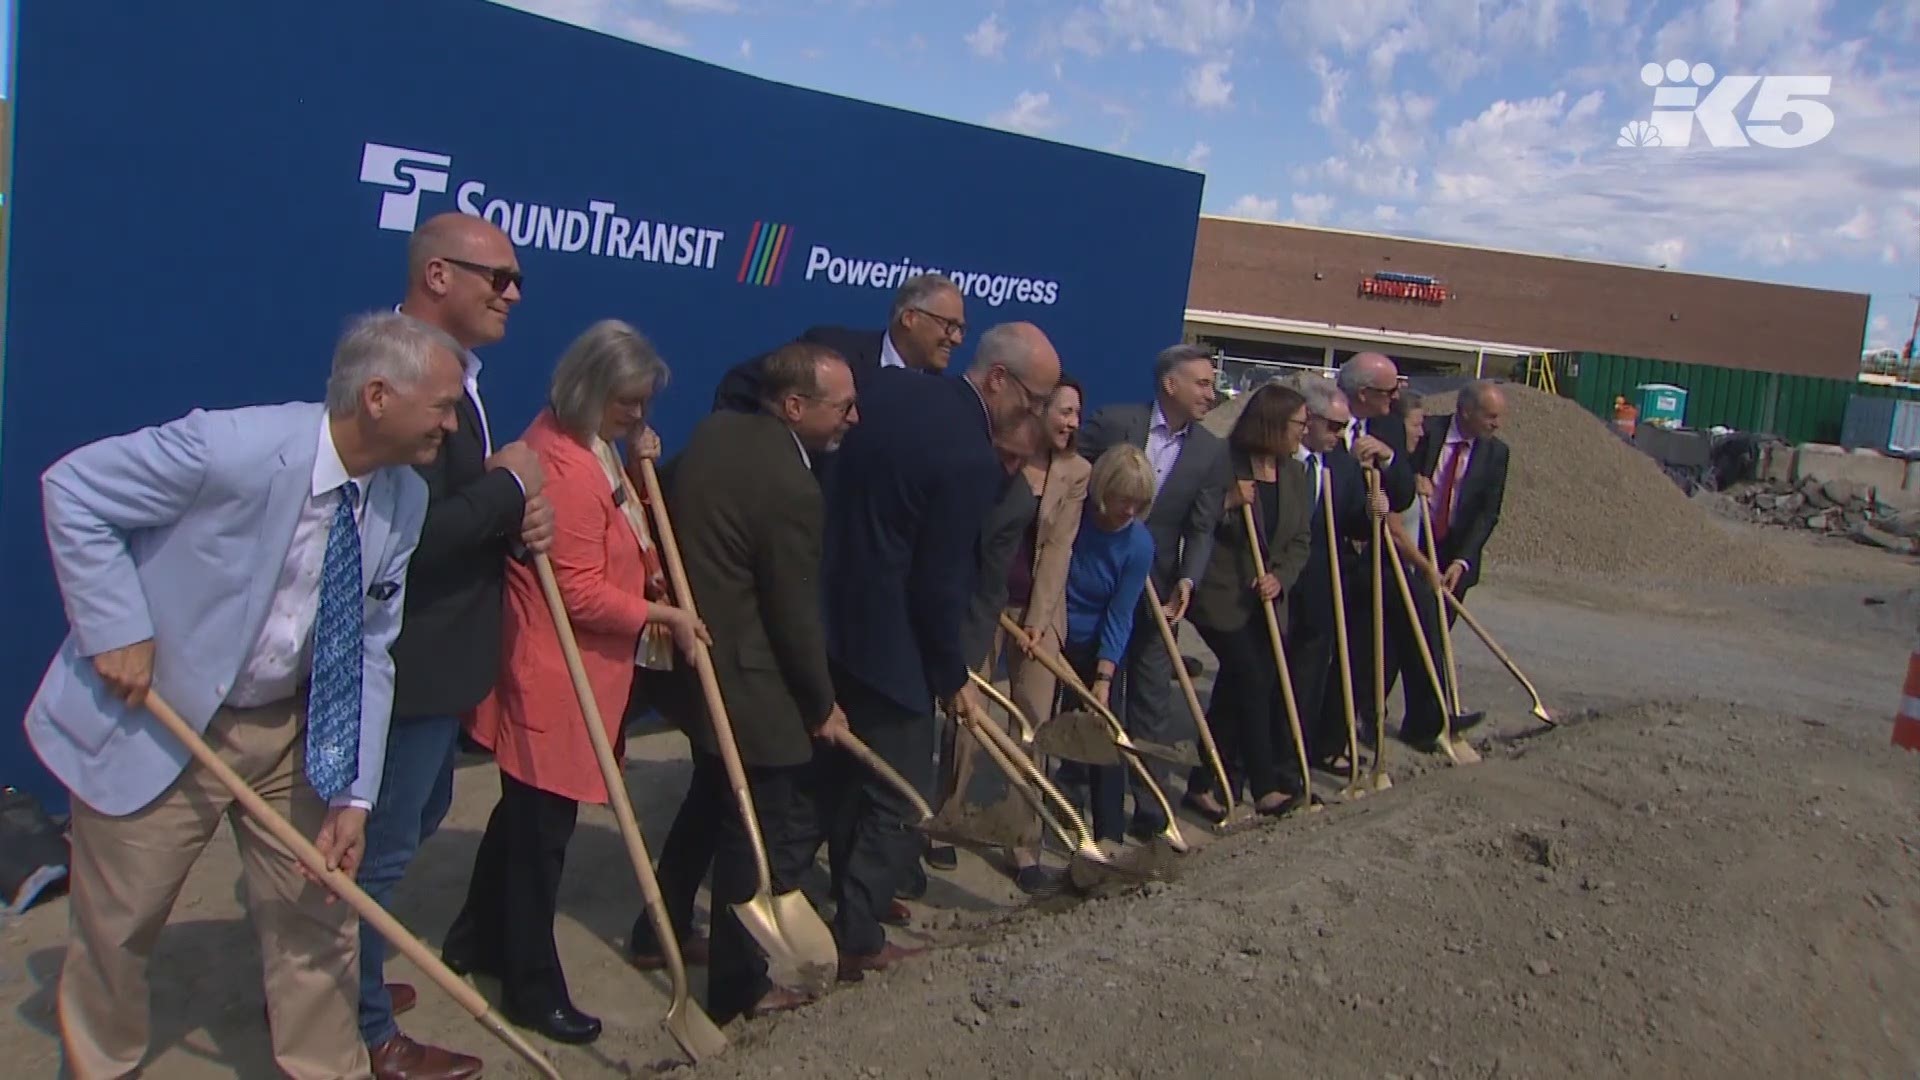 Over a dozen local leaders attended a groundbreaking ceremony for the Lynnwood Link light rail extension in Lynnwood on Tuesday, including Washington Governor Jay Inslee, Sens. Maria Cantwell and Patty Murray, and Reps. Rick Larsen and Suzan DelBene.